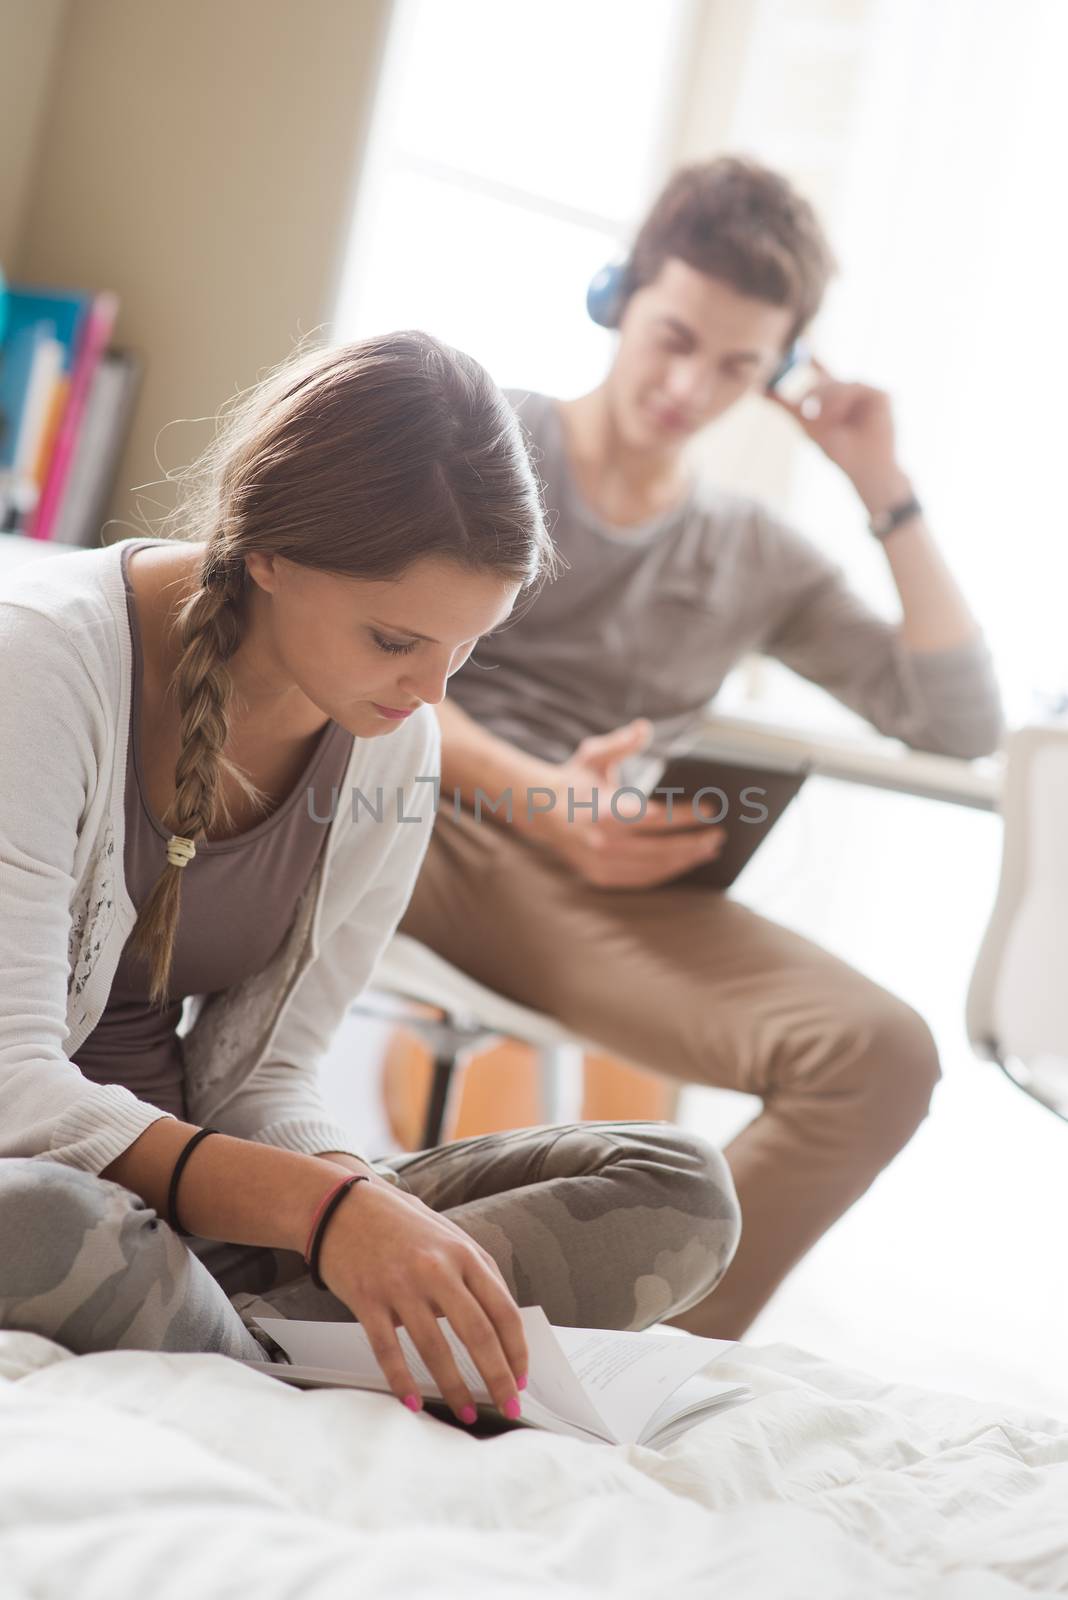 Teen boy and girl at home, sitting and studying. Girl in the foreground.